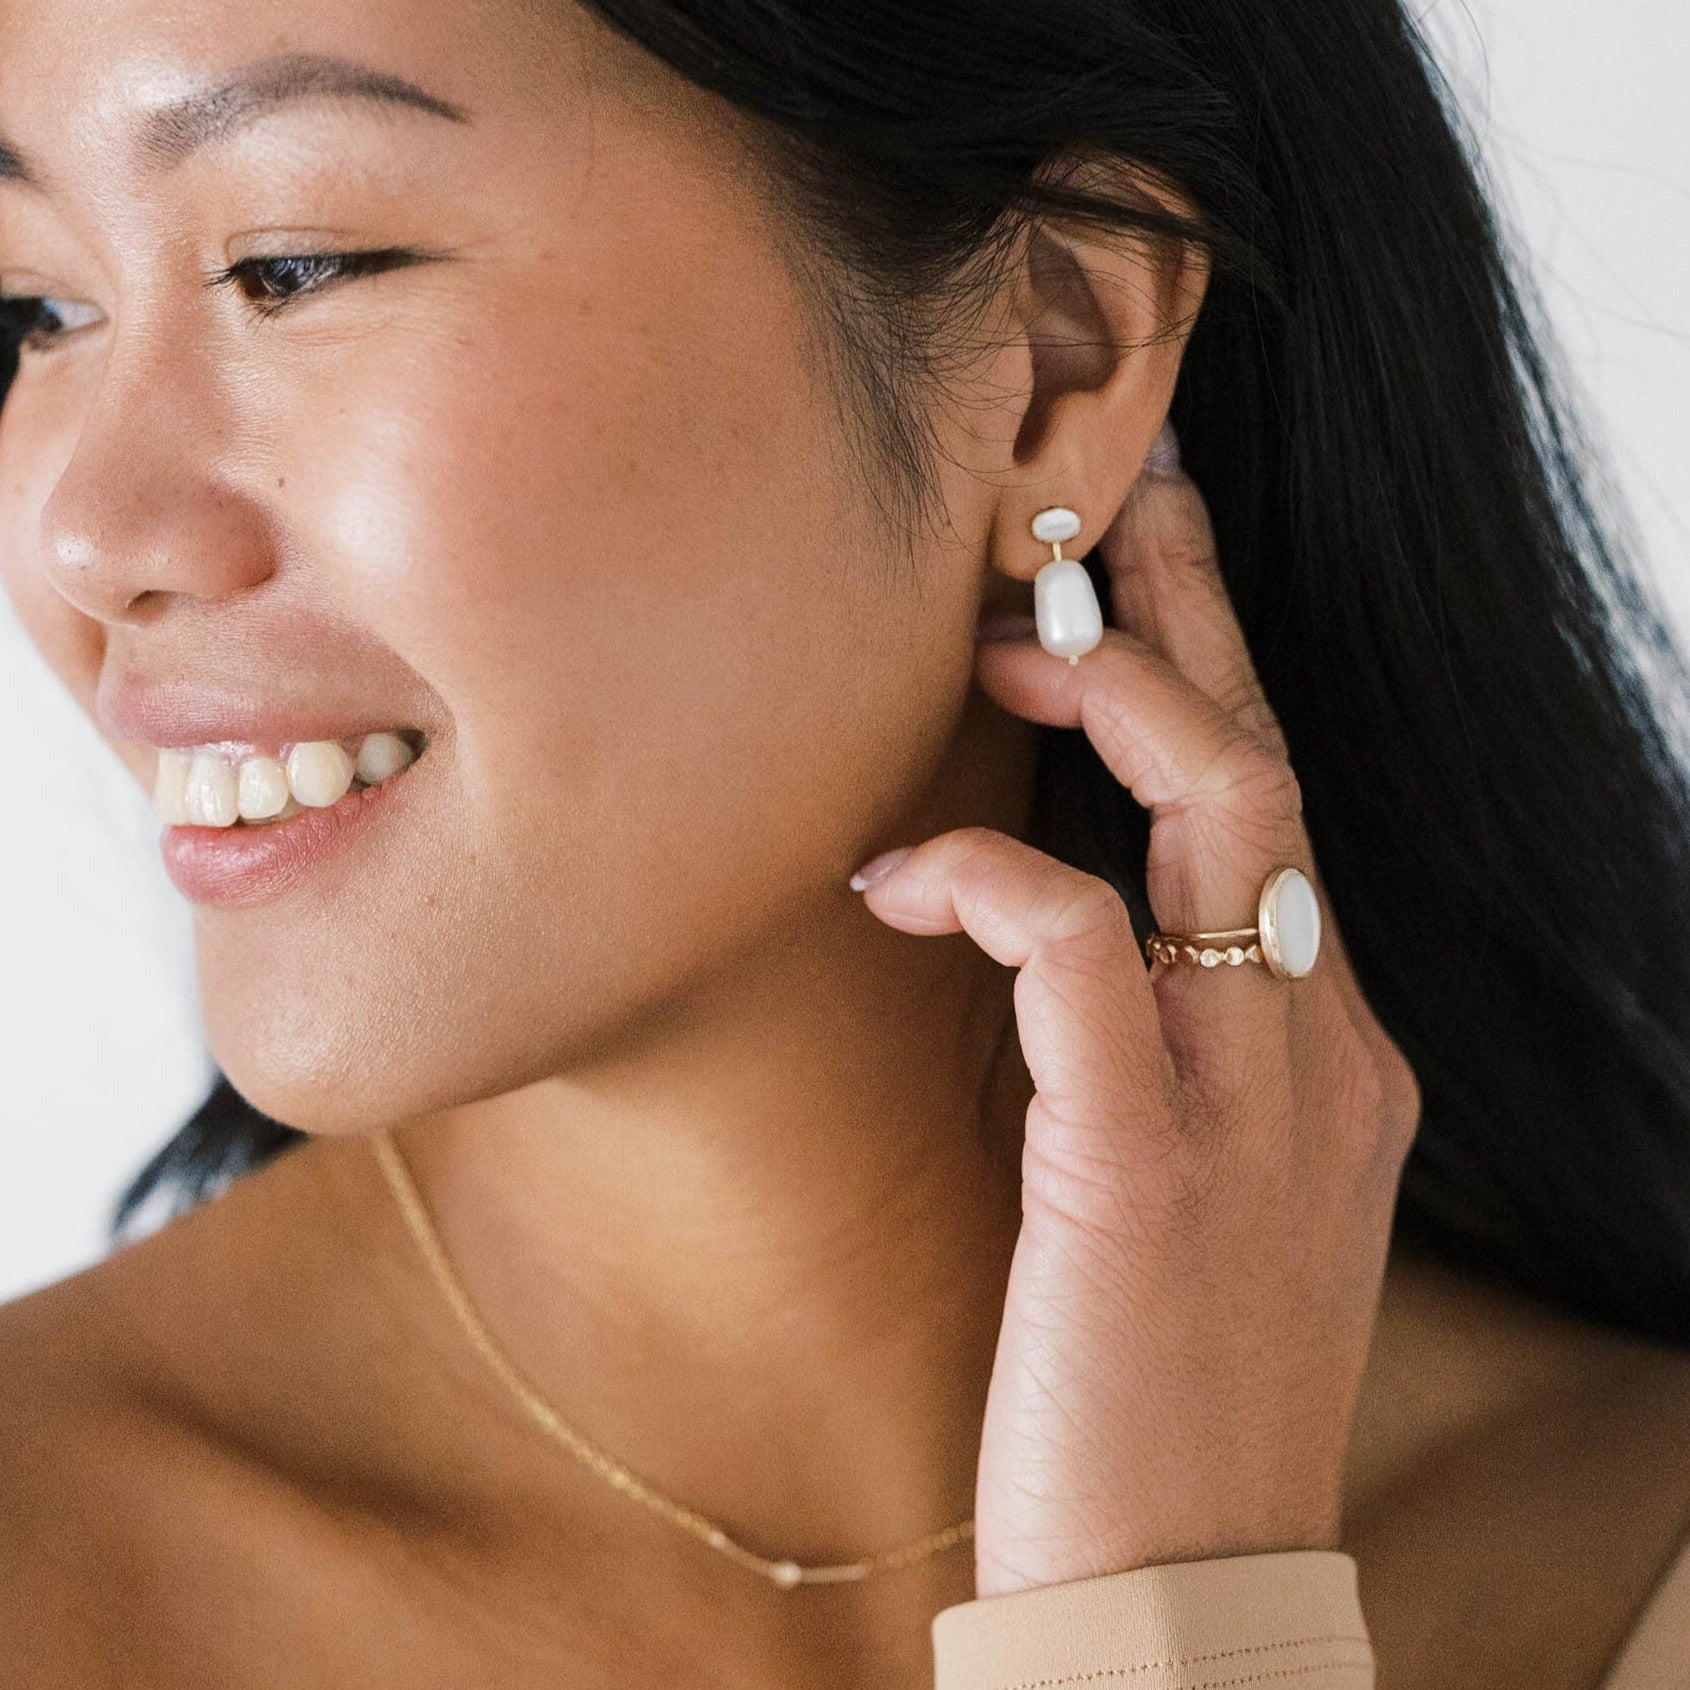 Pearl Drop earrings that can be worn everyday. Elegant, simple and modern.